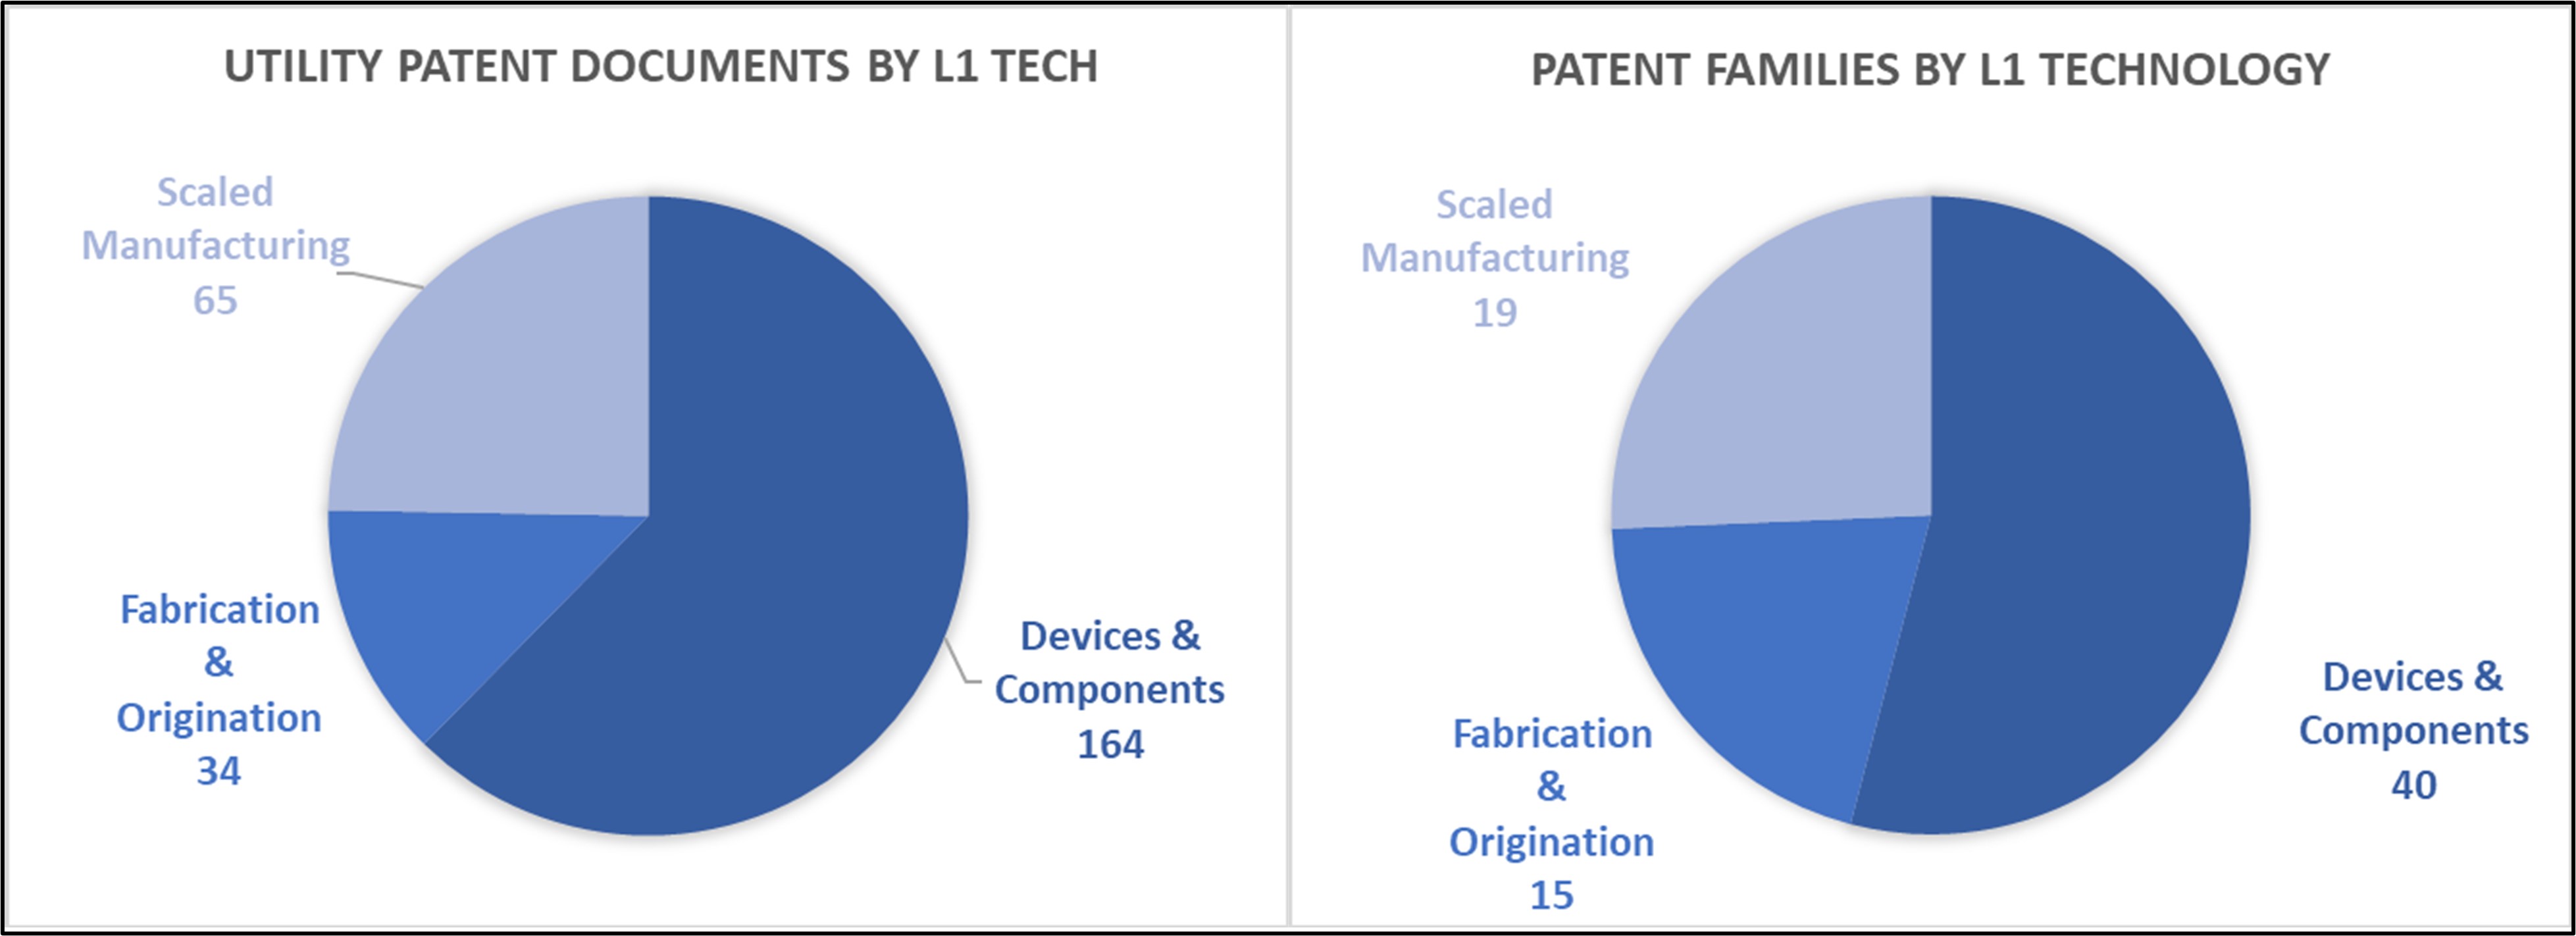 Utility Patent Documents by L1 Technology